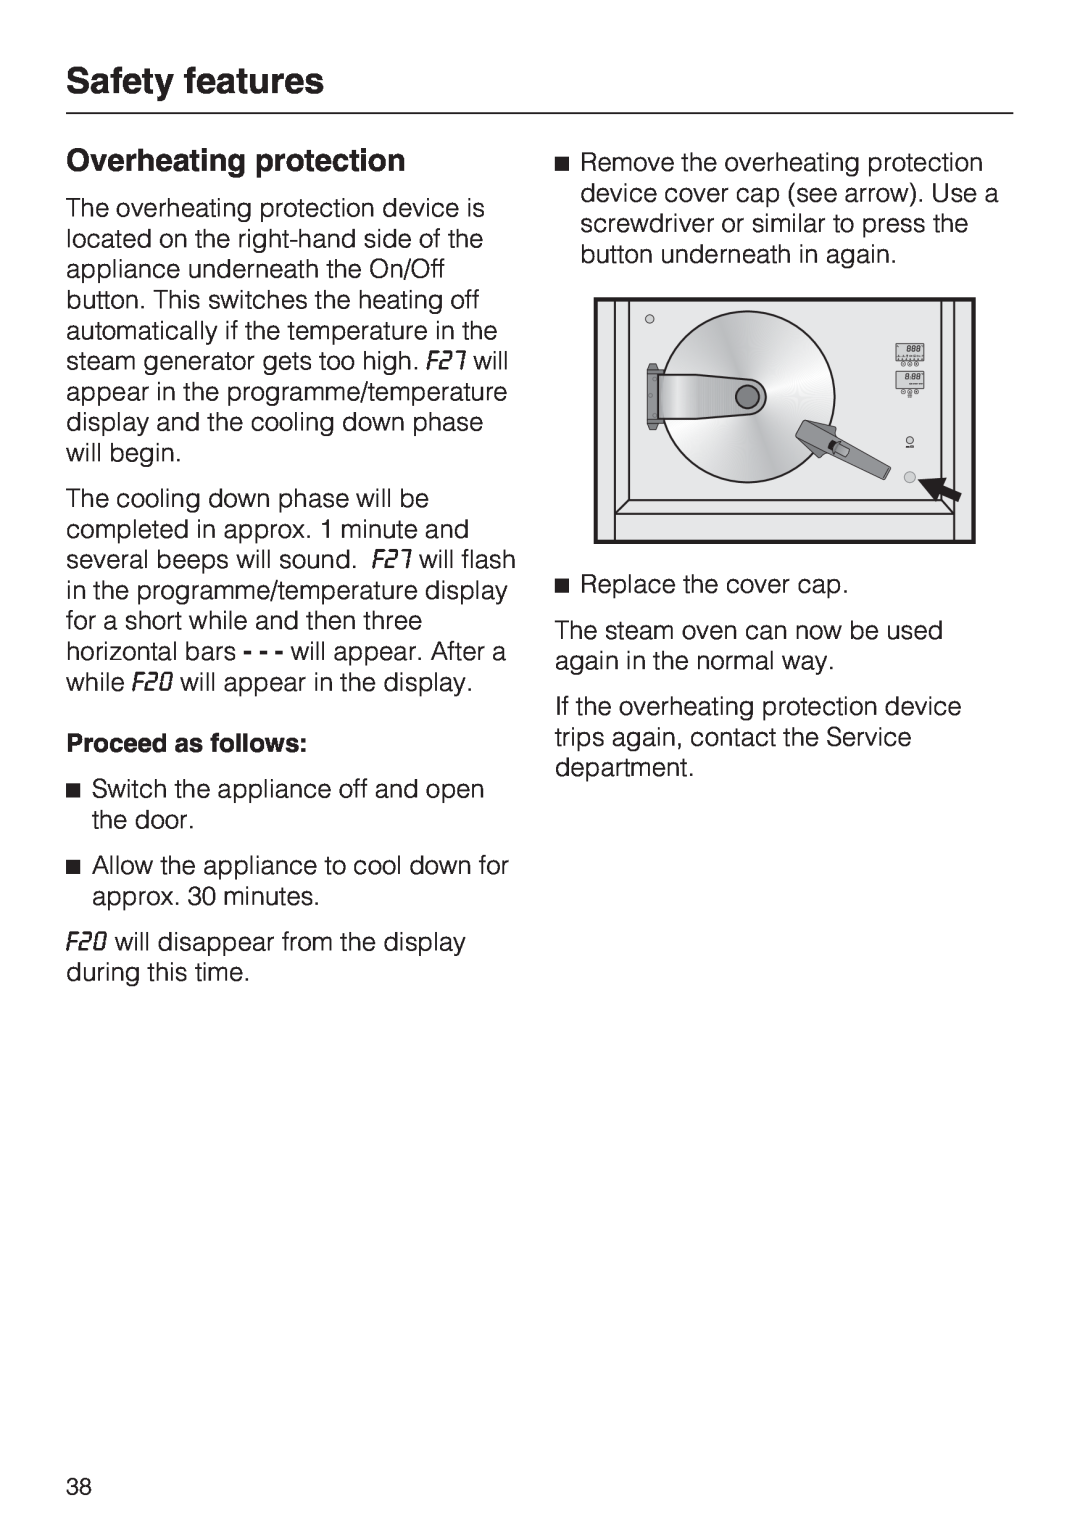 Miele DG 4164 L, DG 4064 L operating instructions Overheating protection, Safety features, Proceed as follows 